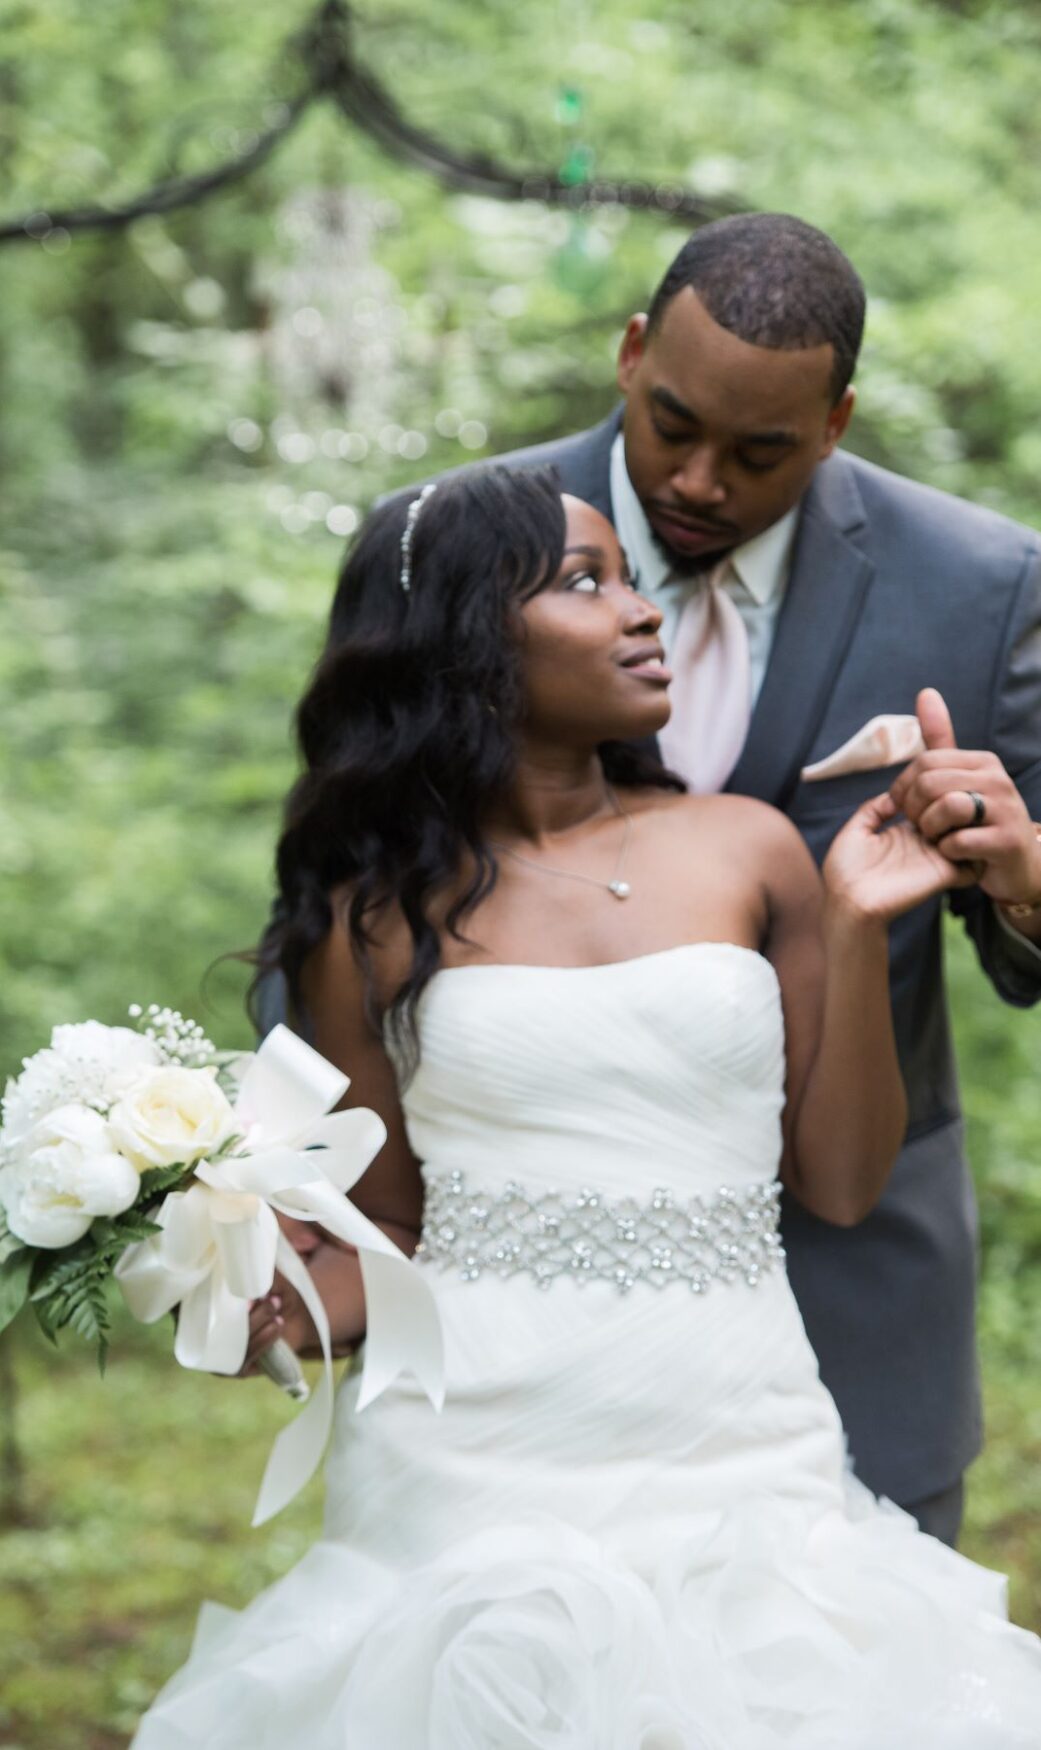 36 Tried-and-True Wedding Photo Poses